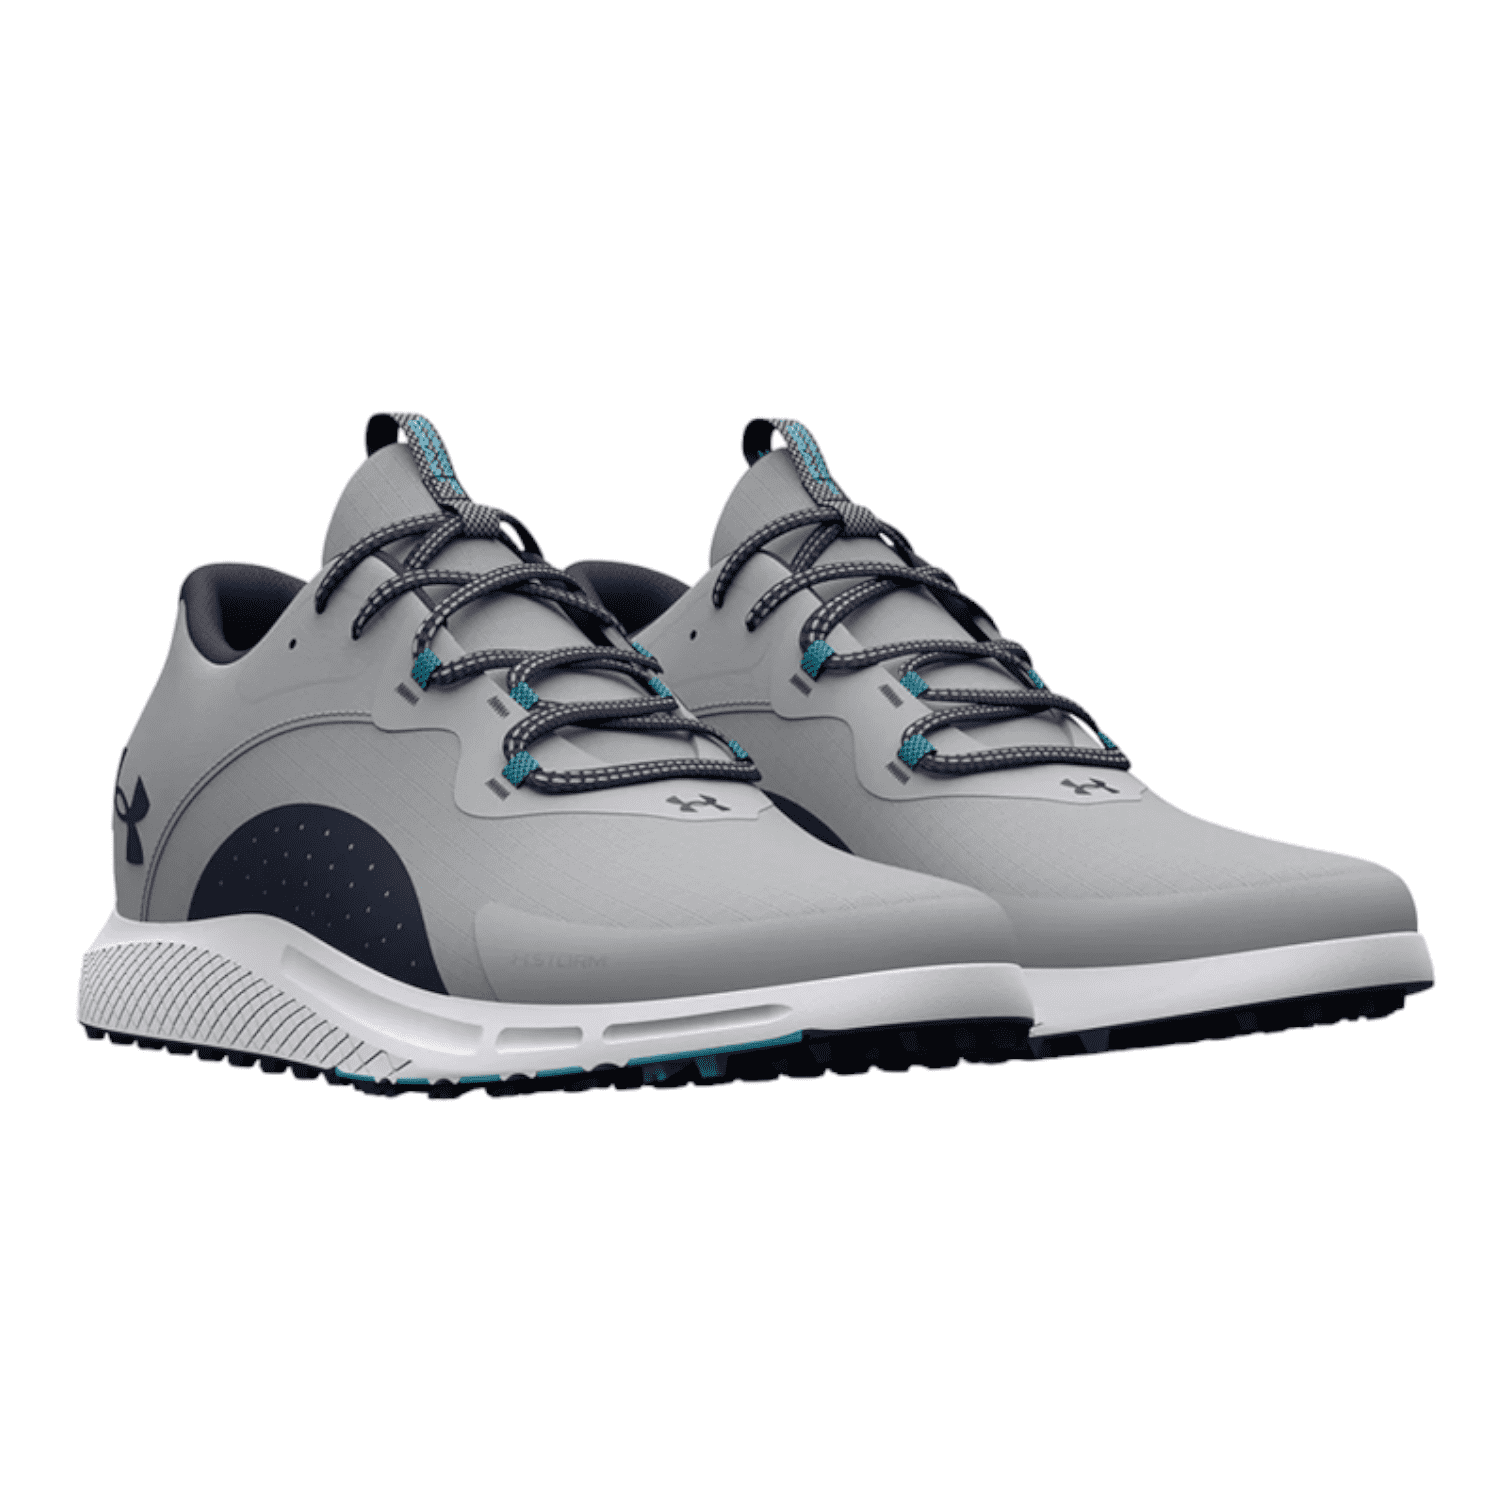 Under Armour Charged Draw 2 SL Golf Shoes 3026399